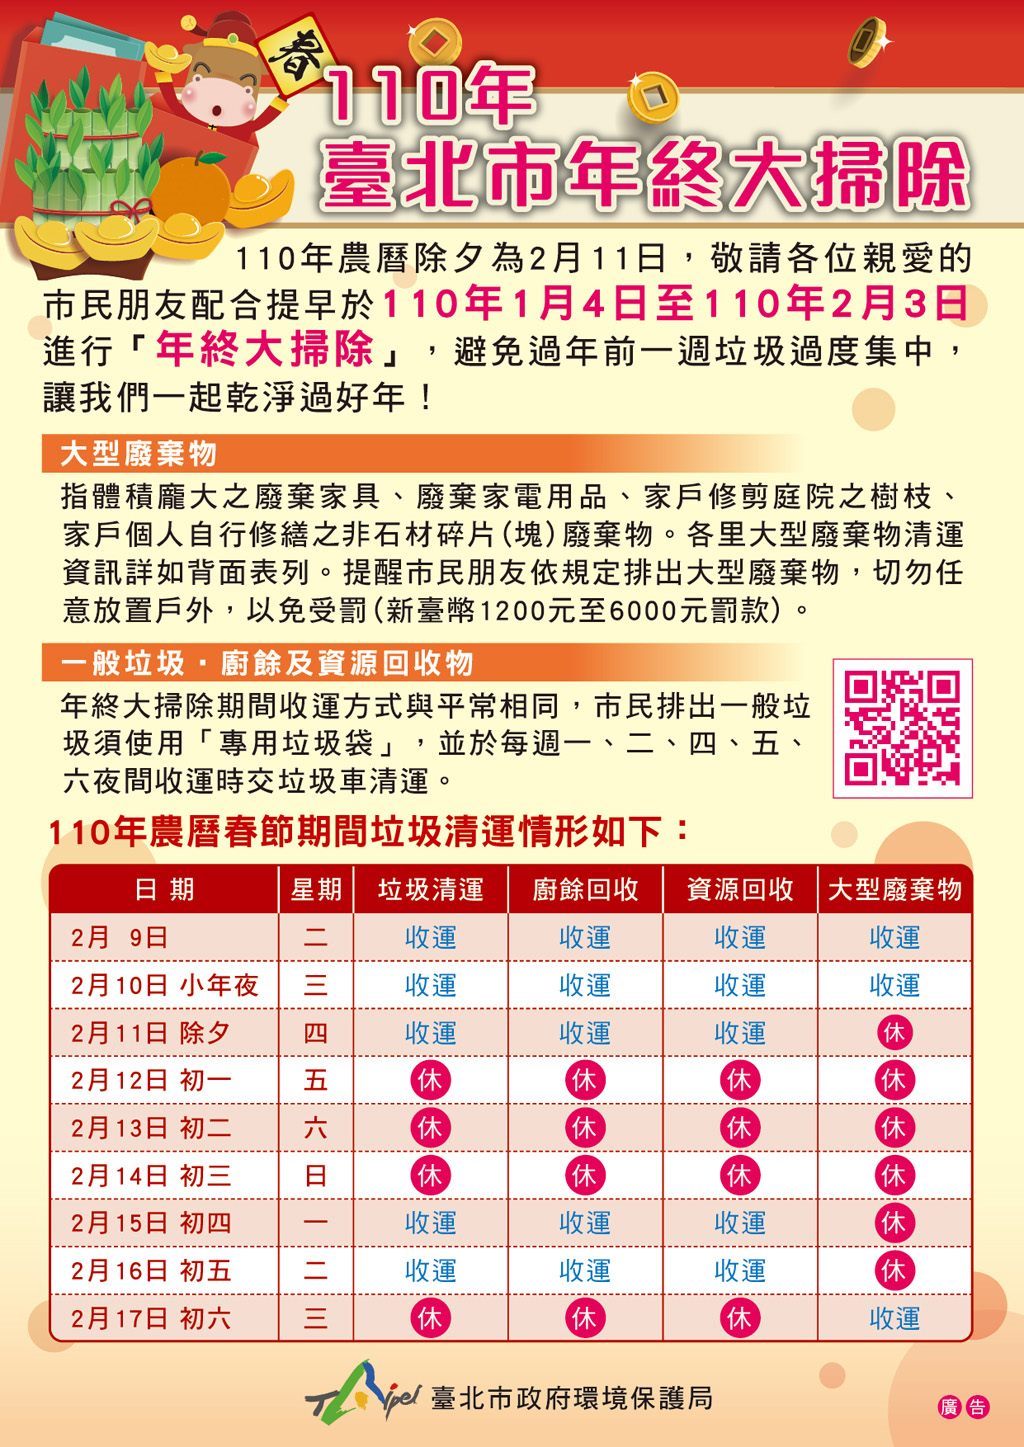 Department Of Sports Taipei City Government News City Announces Garbage Collection Schedule For 21 Cny Holiday